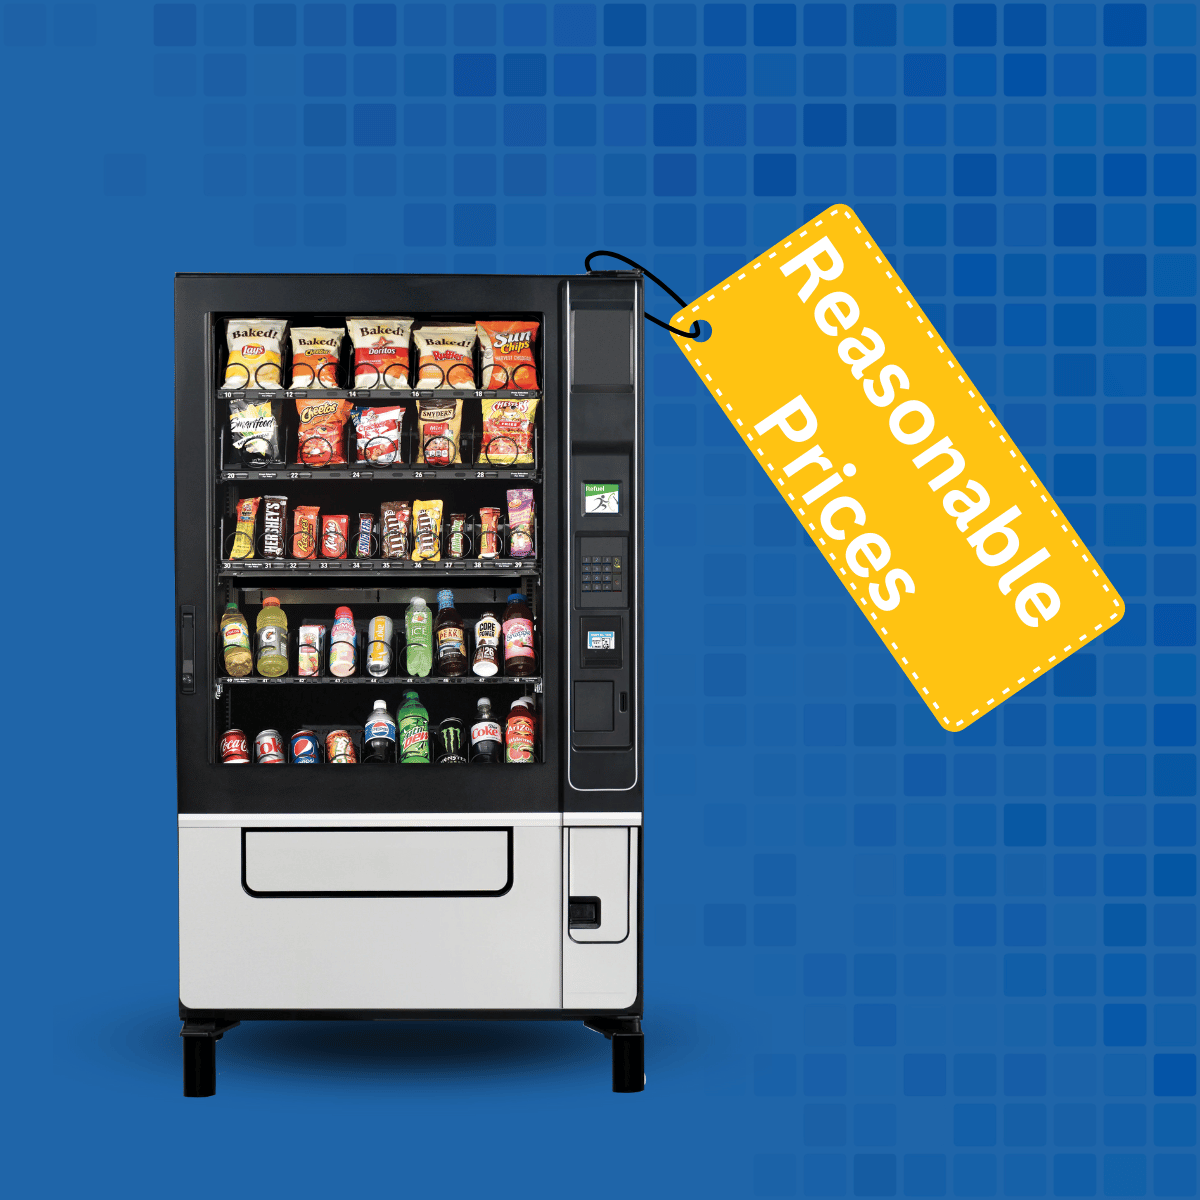 WHERE CAN I GO TO BUY VENDING MACHINES AT REASONABLE PRICES?